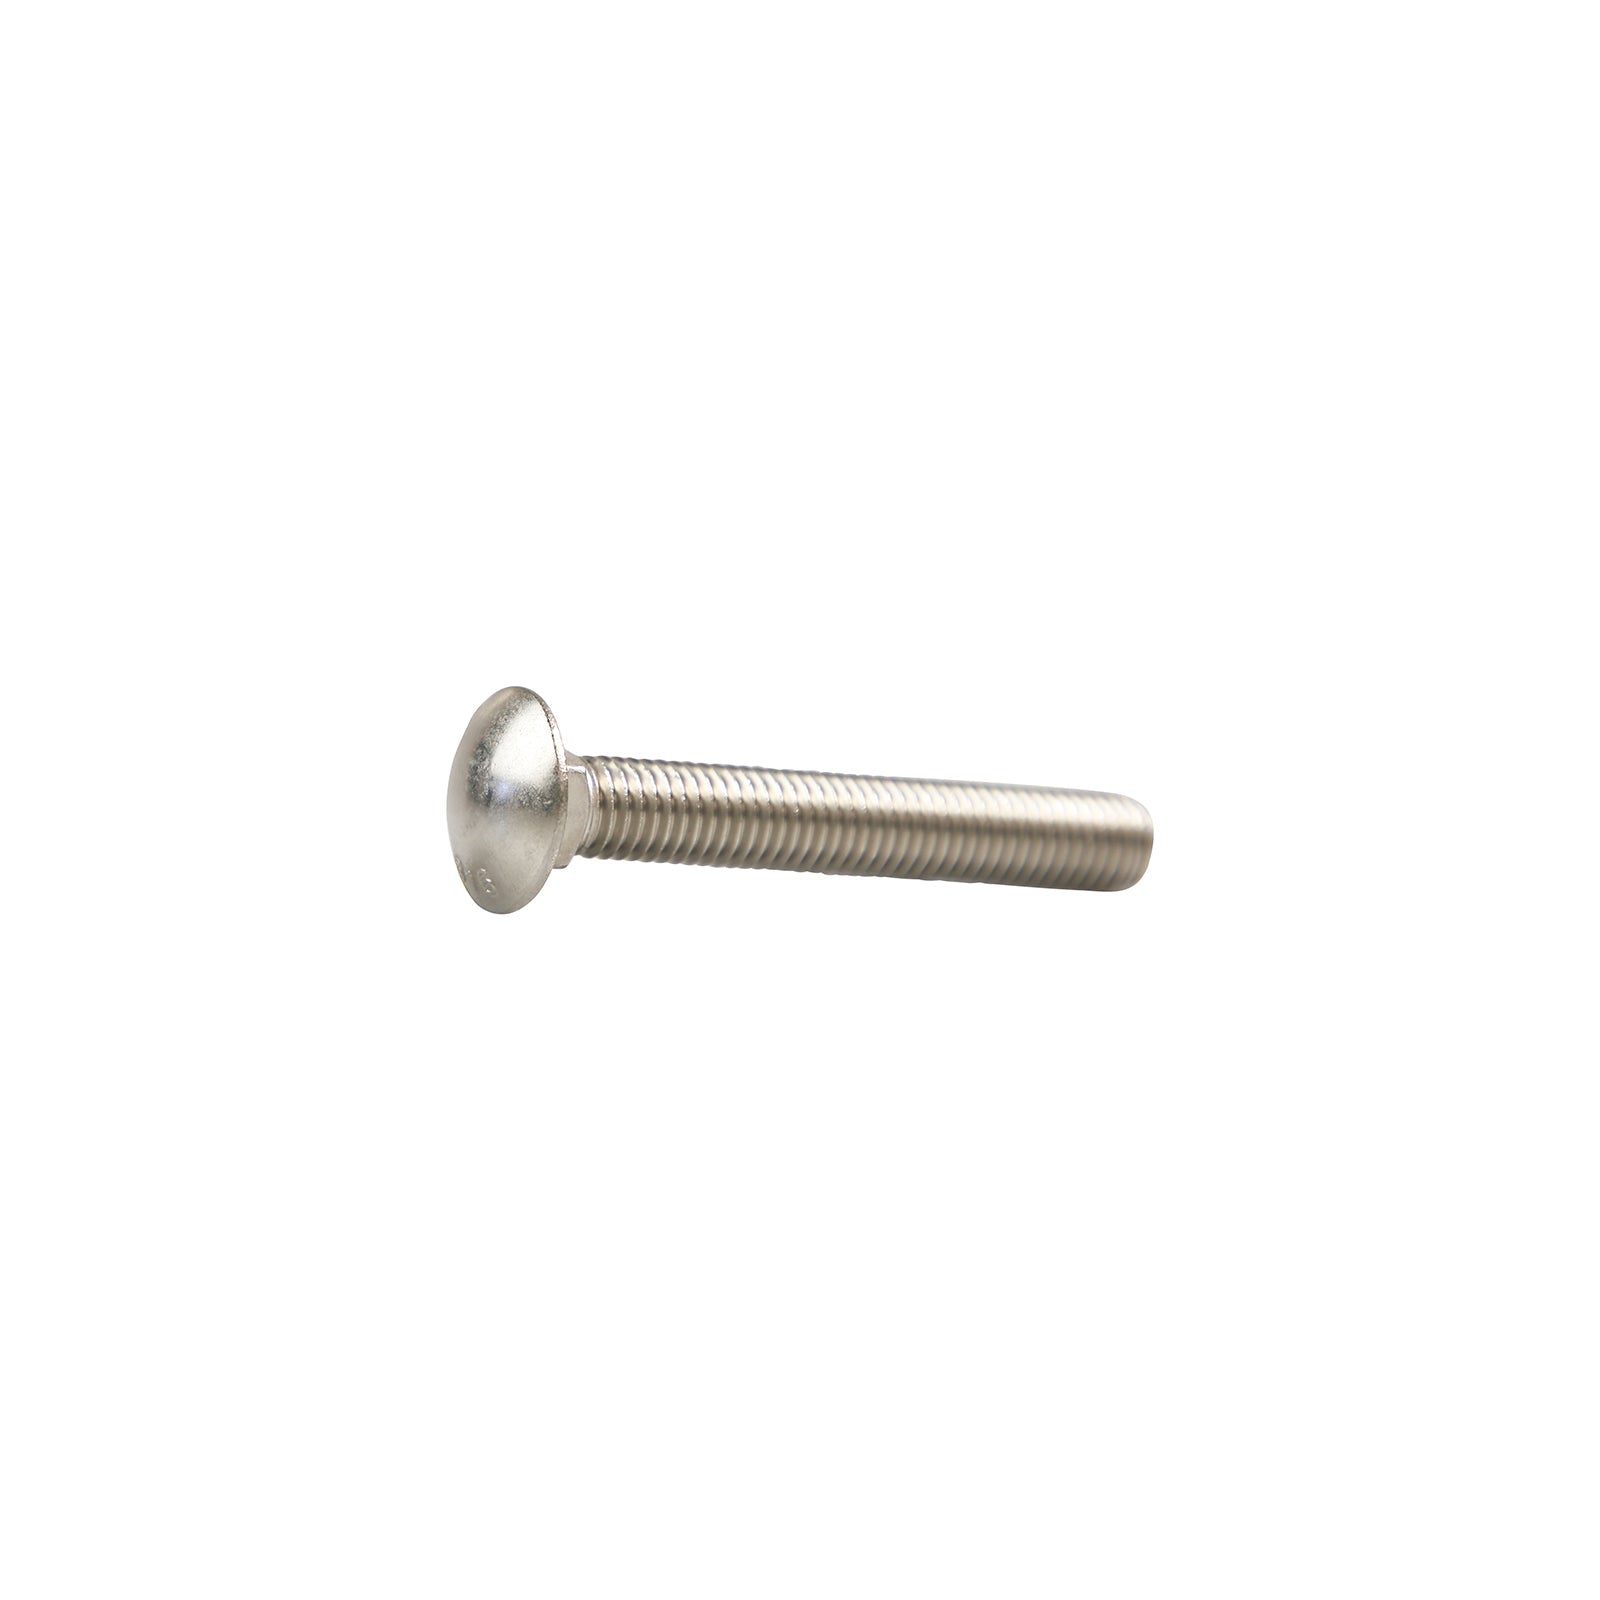 1/2"-13 x 3-1/2" Conquest Carriage Bolt - 316 Stainless Steel